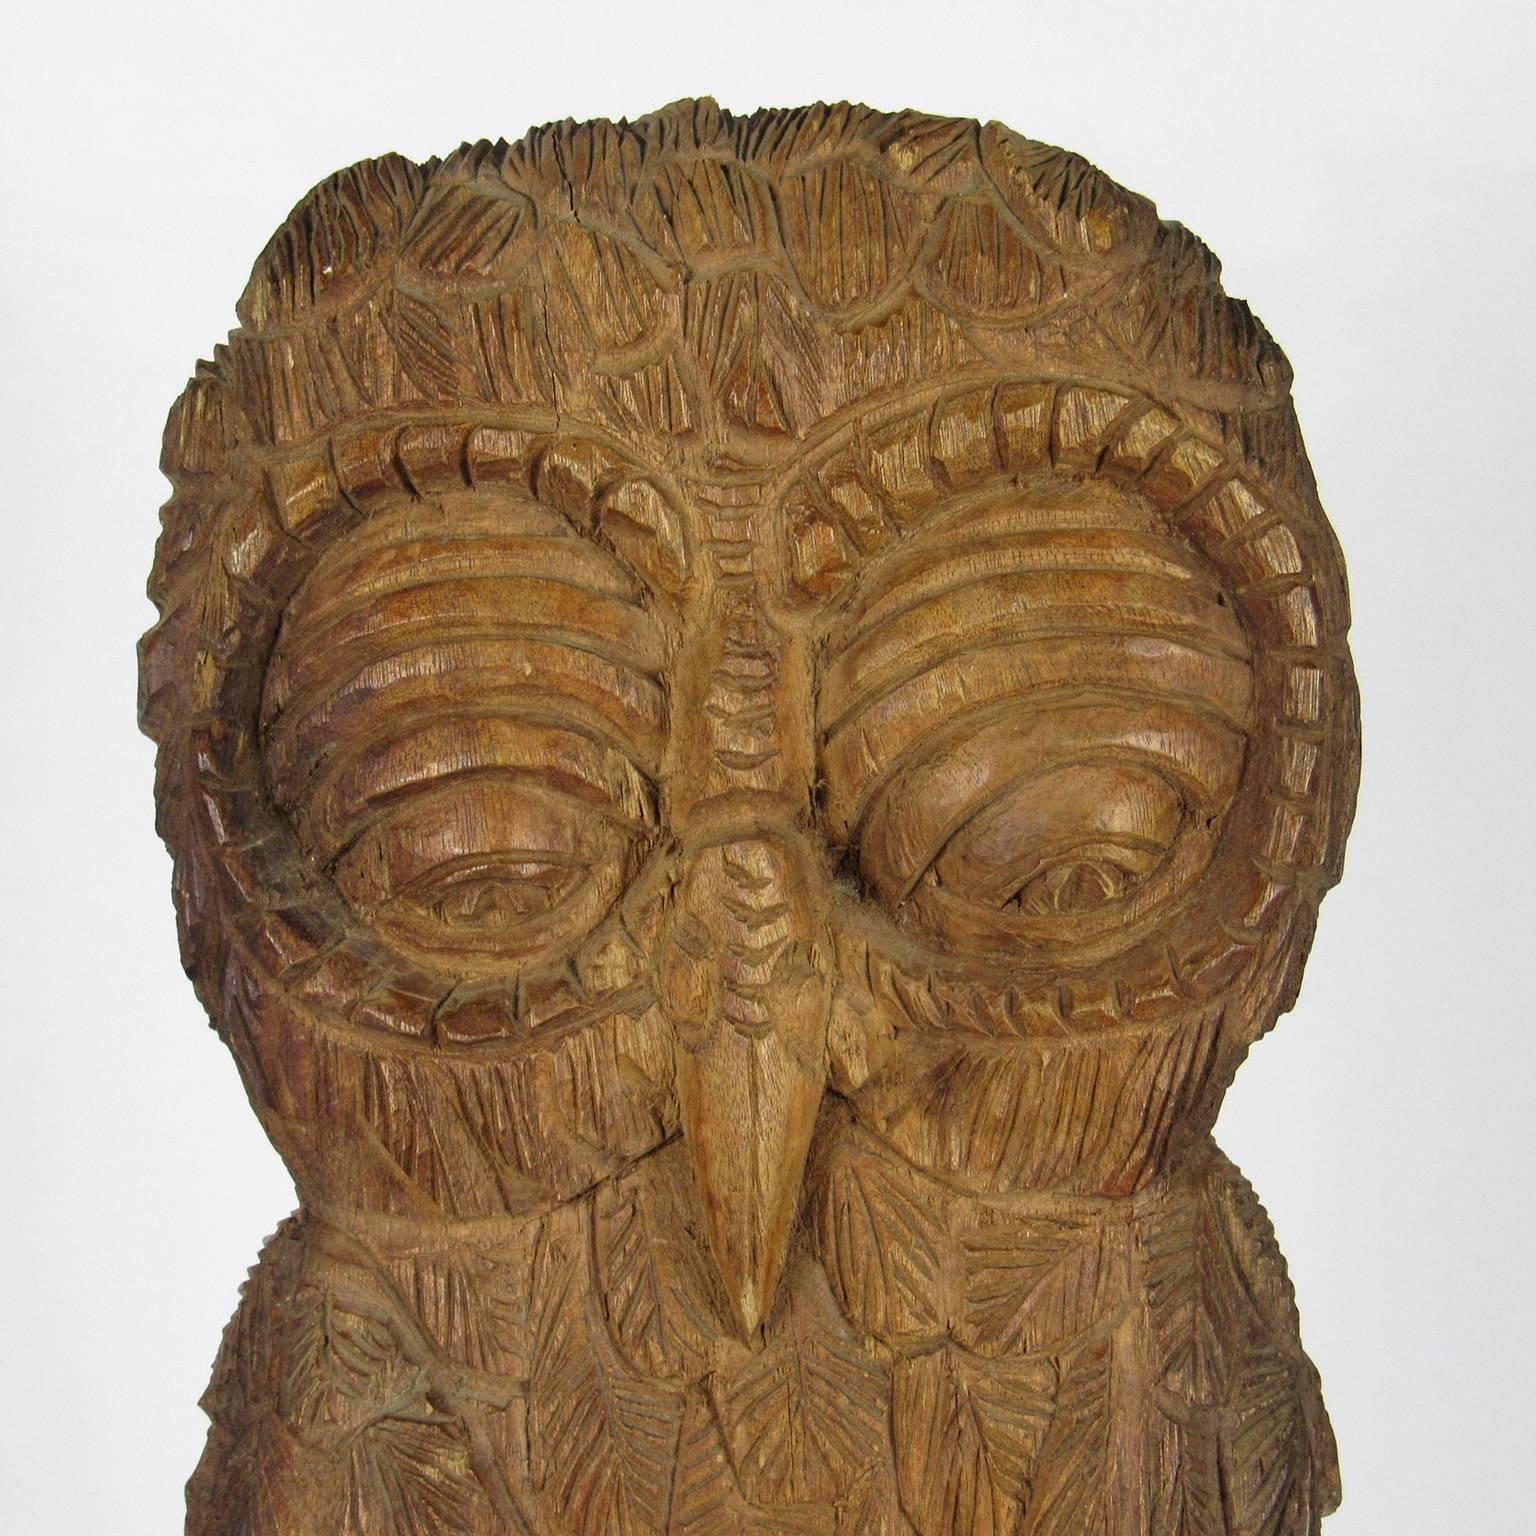 This playful Folk Art carved owl is standing at the ready to enhance your decor and delight your guests. Chip carved from a single piece of wood and initialed on the base R.JP+H, the figure likely dates to the end of the 19th or early 20th century.